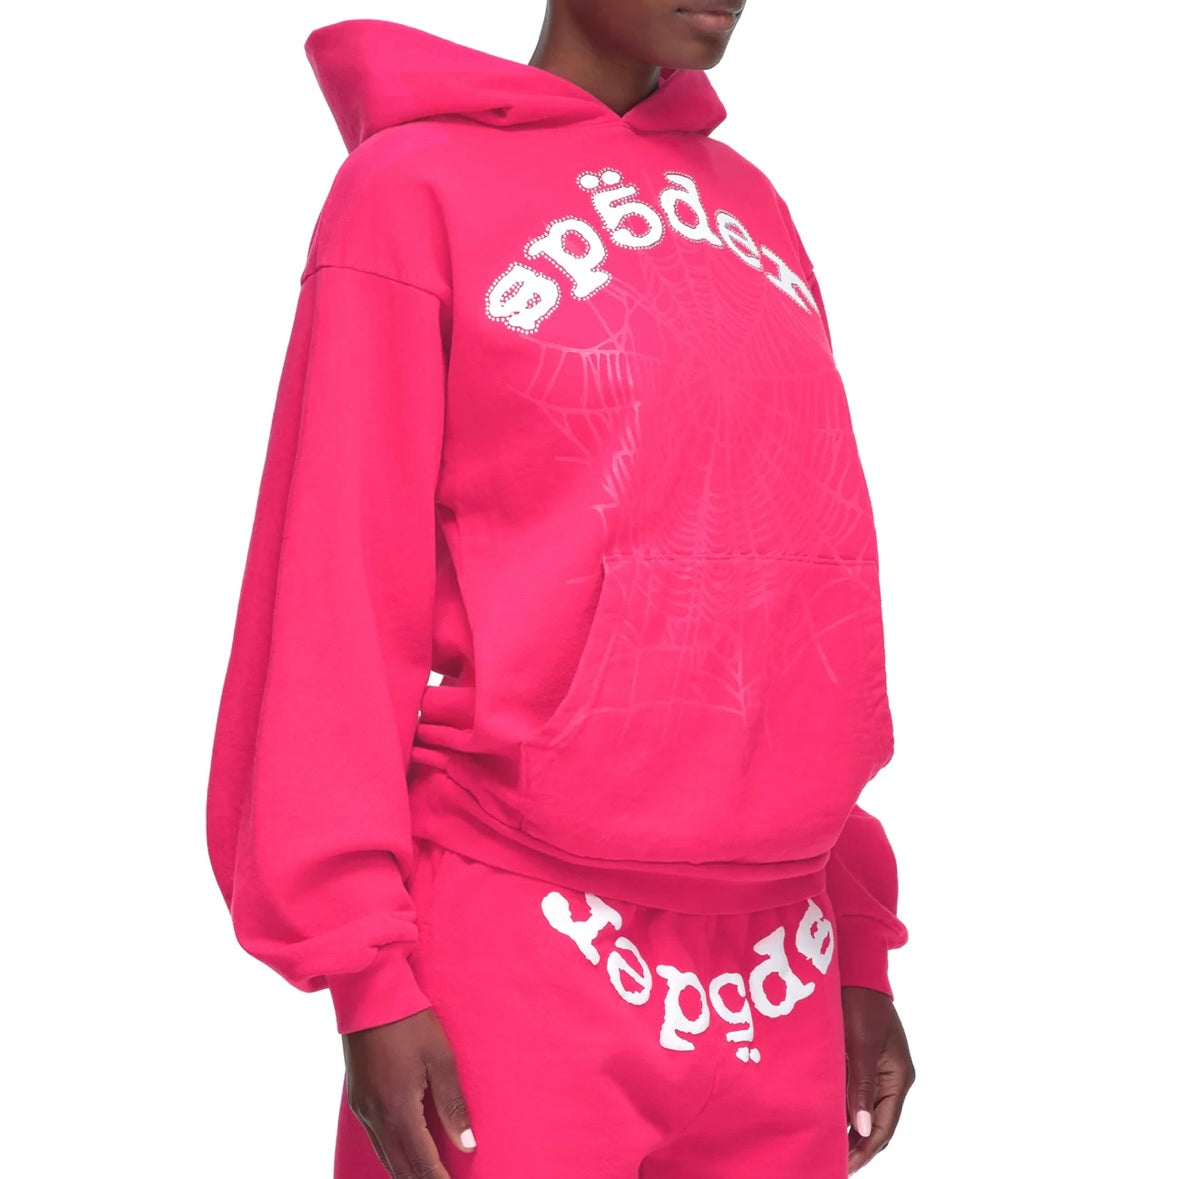 Sp5der Pink White Rhinestone Legacy Hoodie On Body Front Right View Female